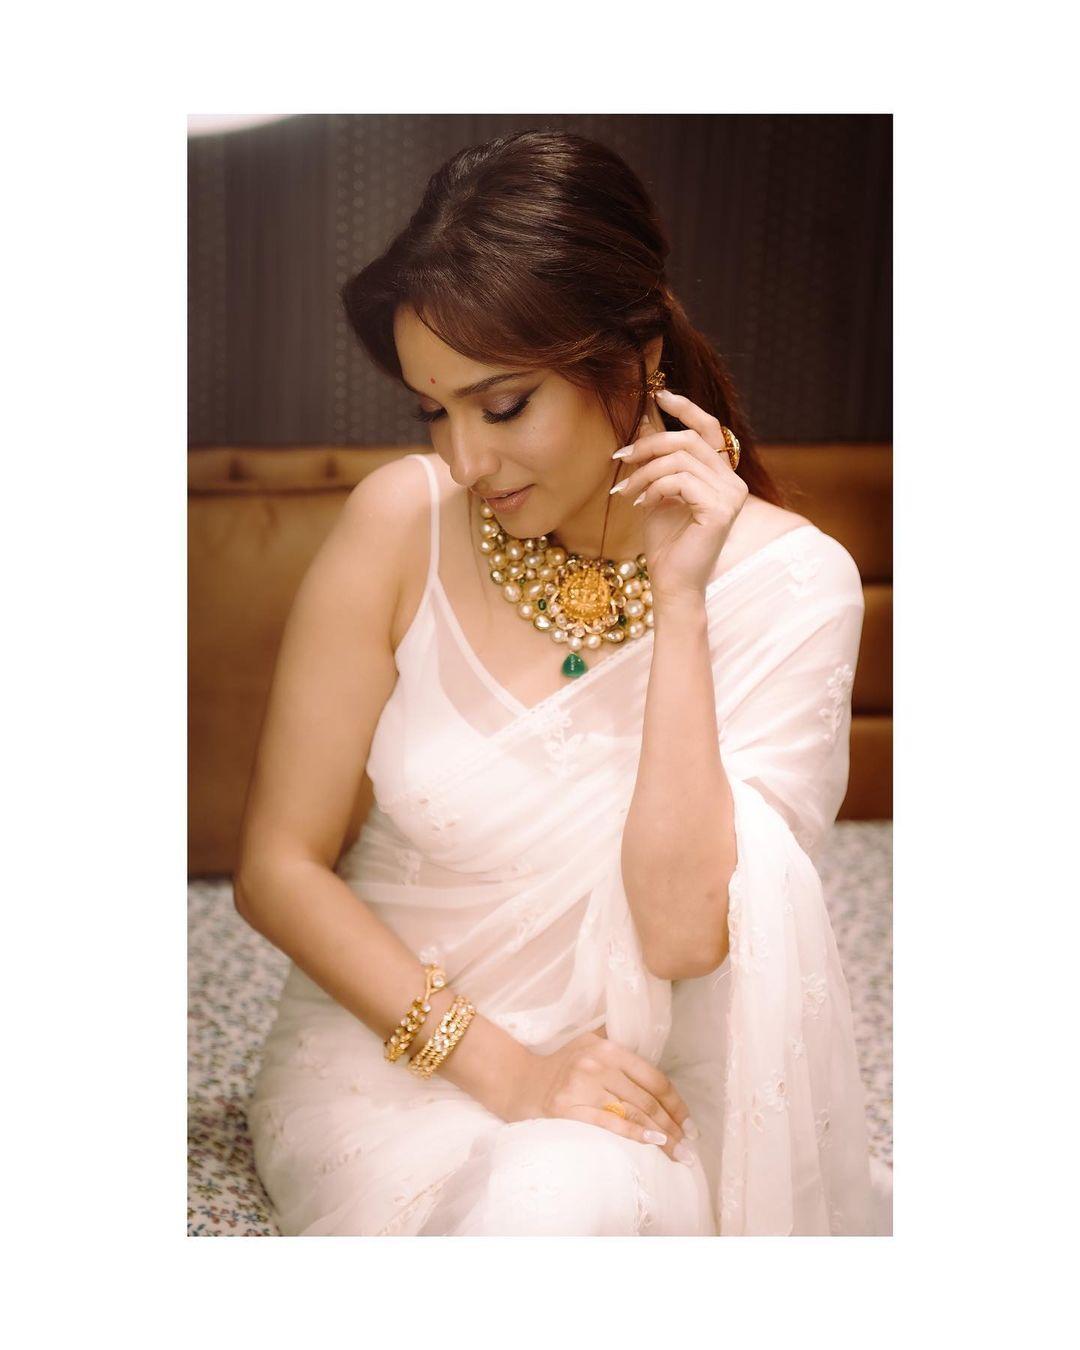 Sometimes, simplicity is what makes you stand out. Ankita's plain white saree paired with stunning contrasting jewellery with green gem will leave you breathless. This look from the actress will be perfect to slay your festive look